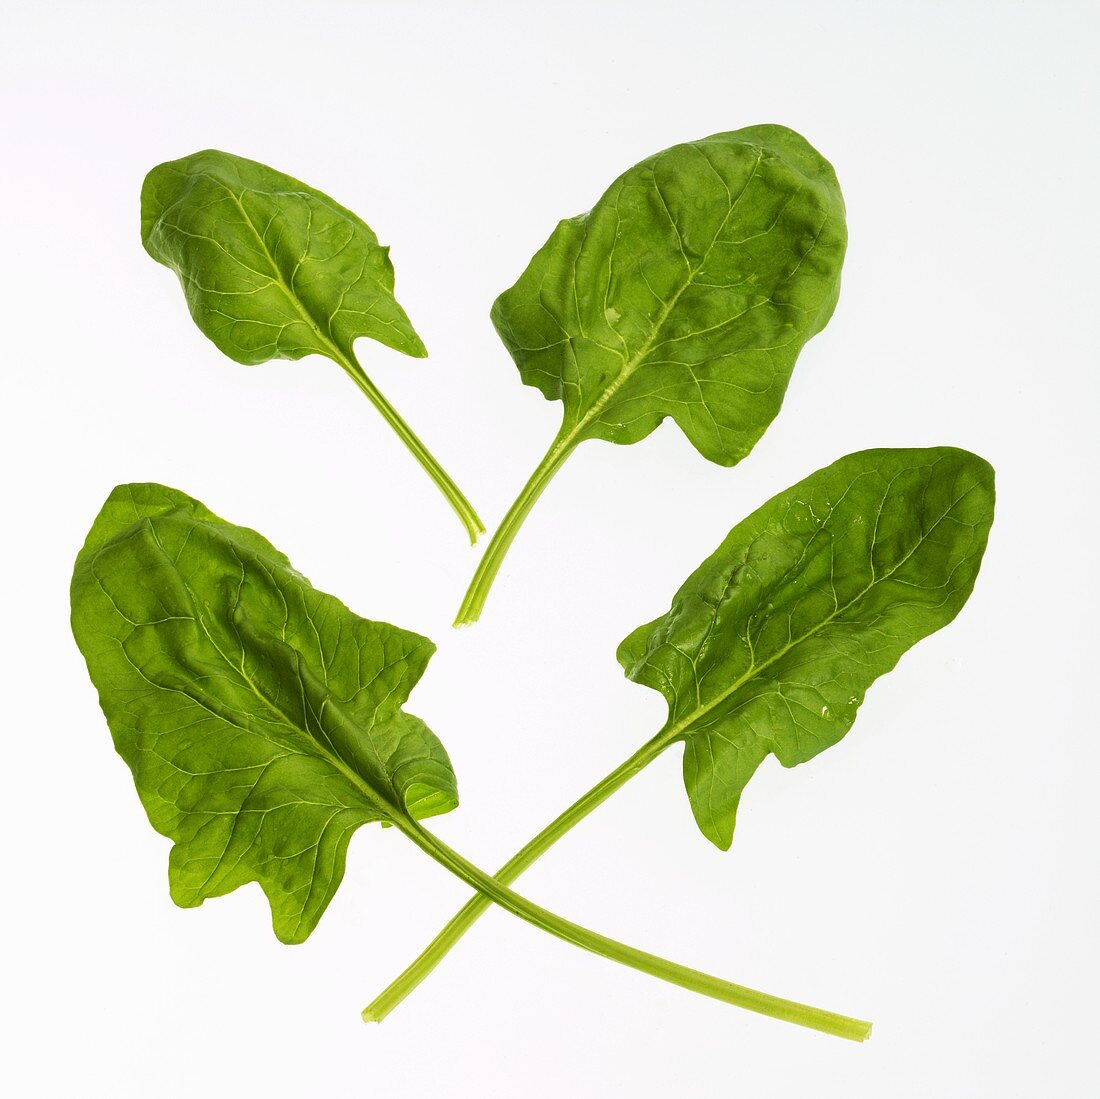 Four spinach leaves